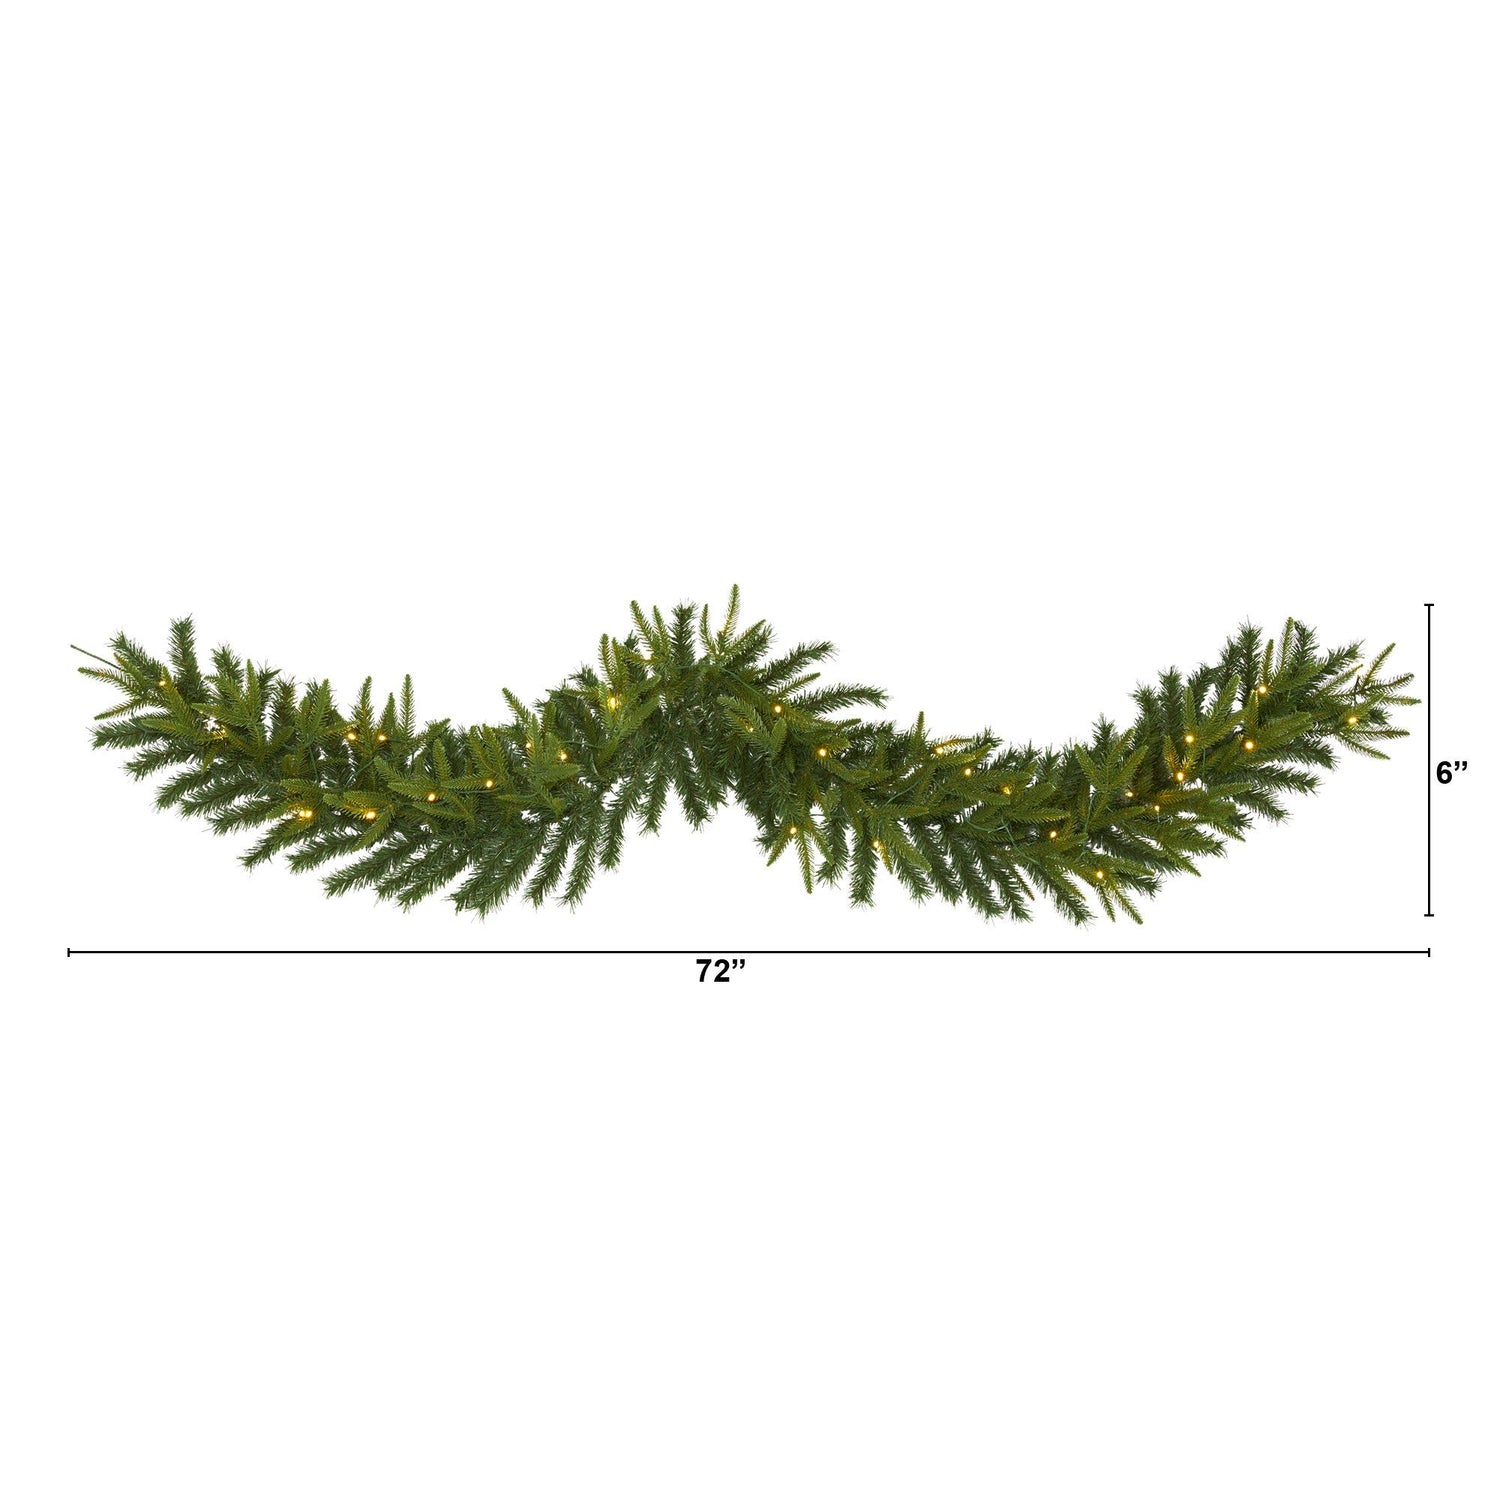 6’ Green Pine Artificial Christmas Garland with 35 Clear LED Lights